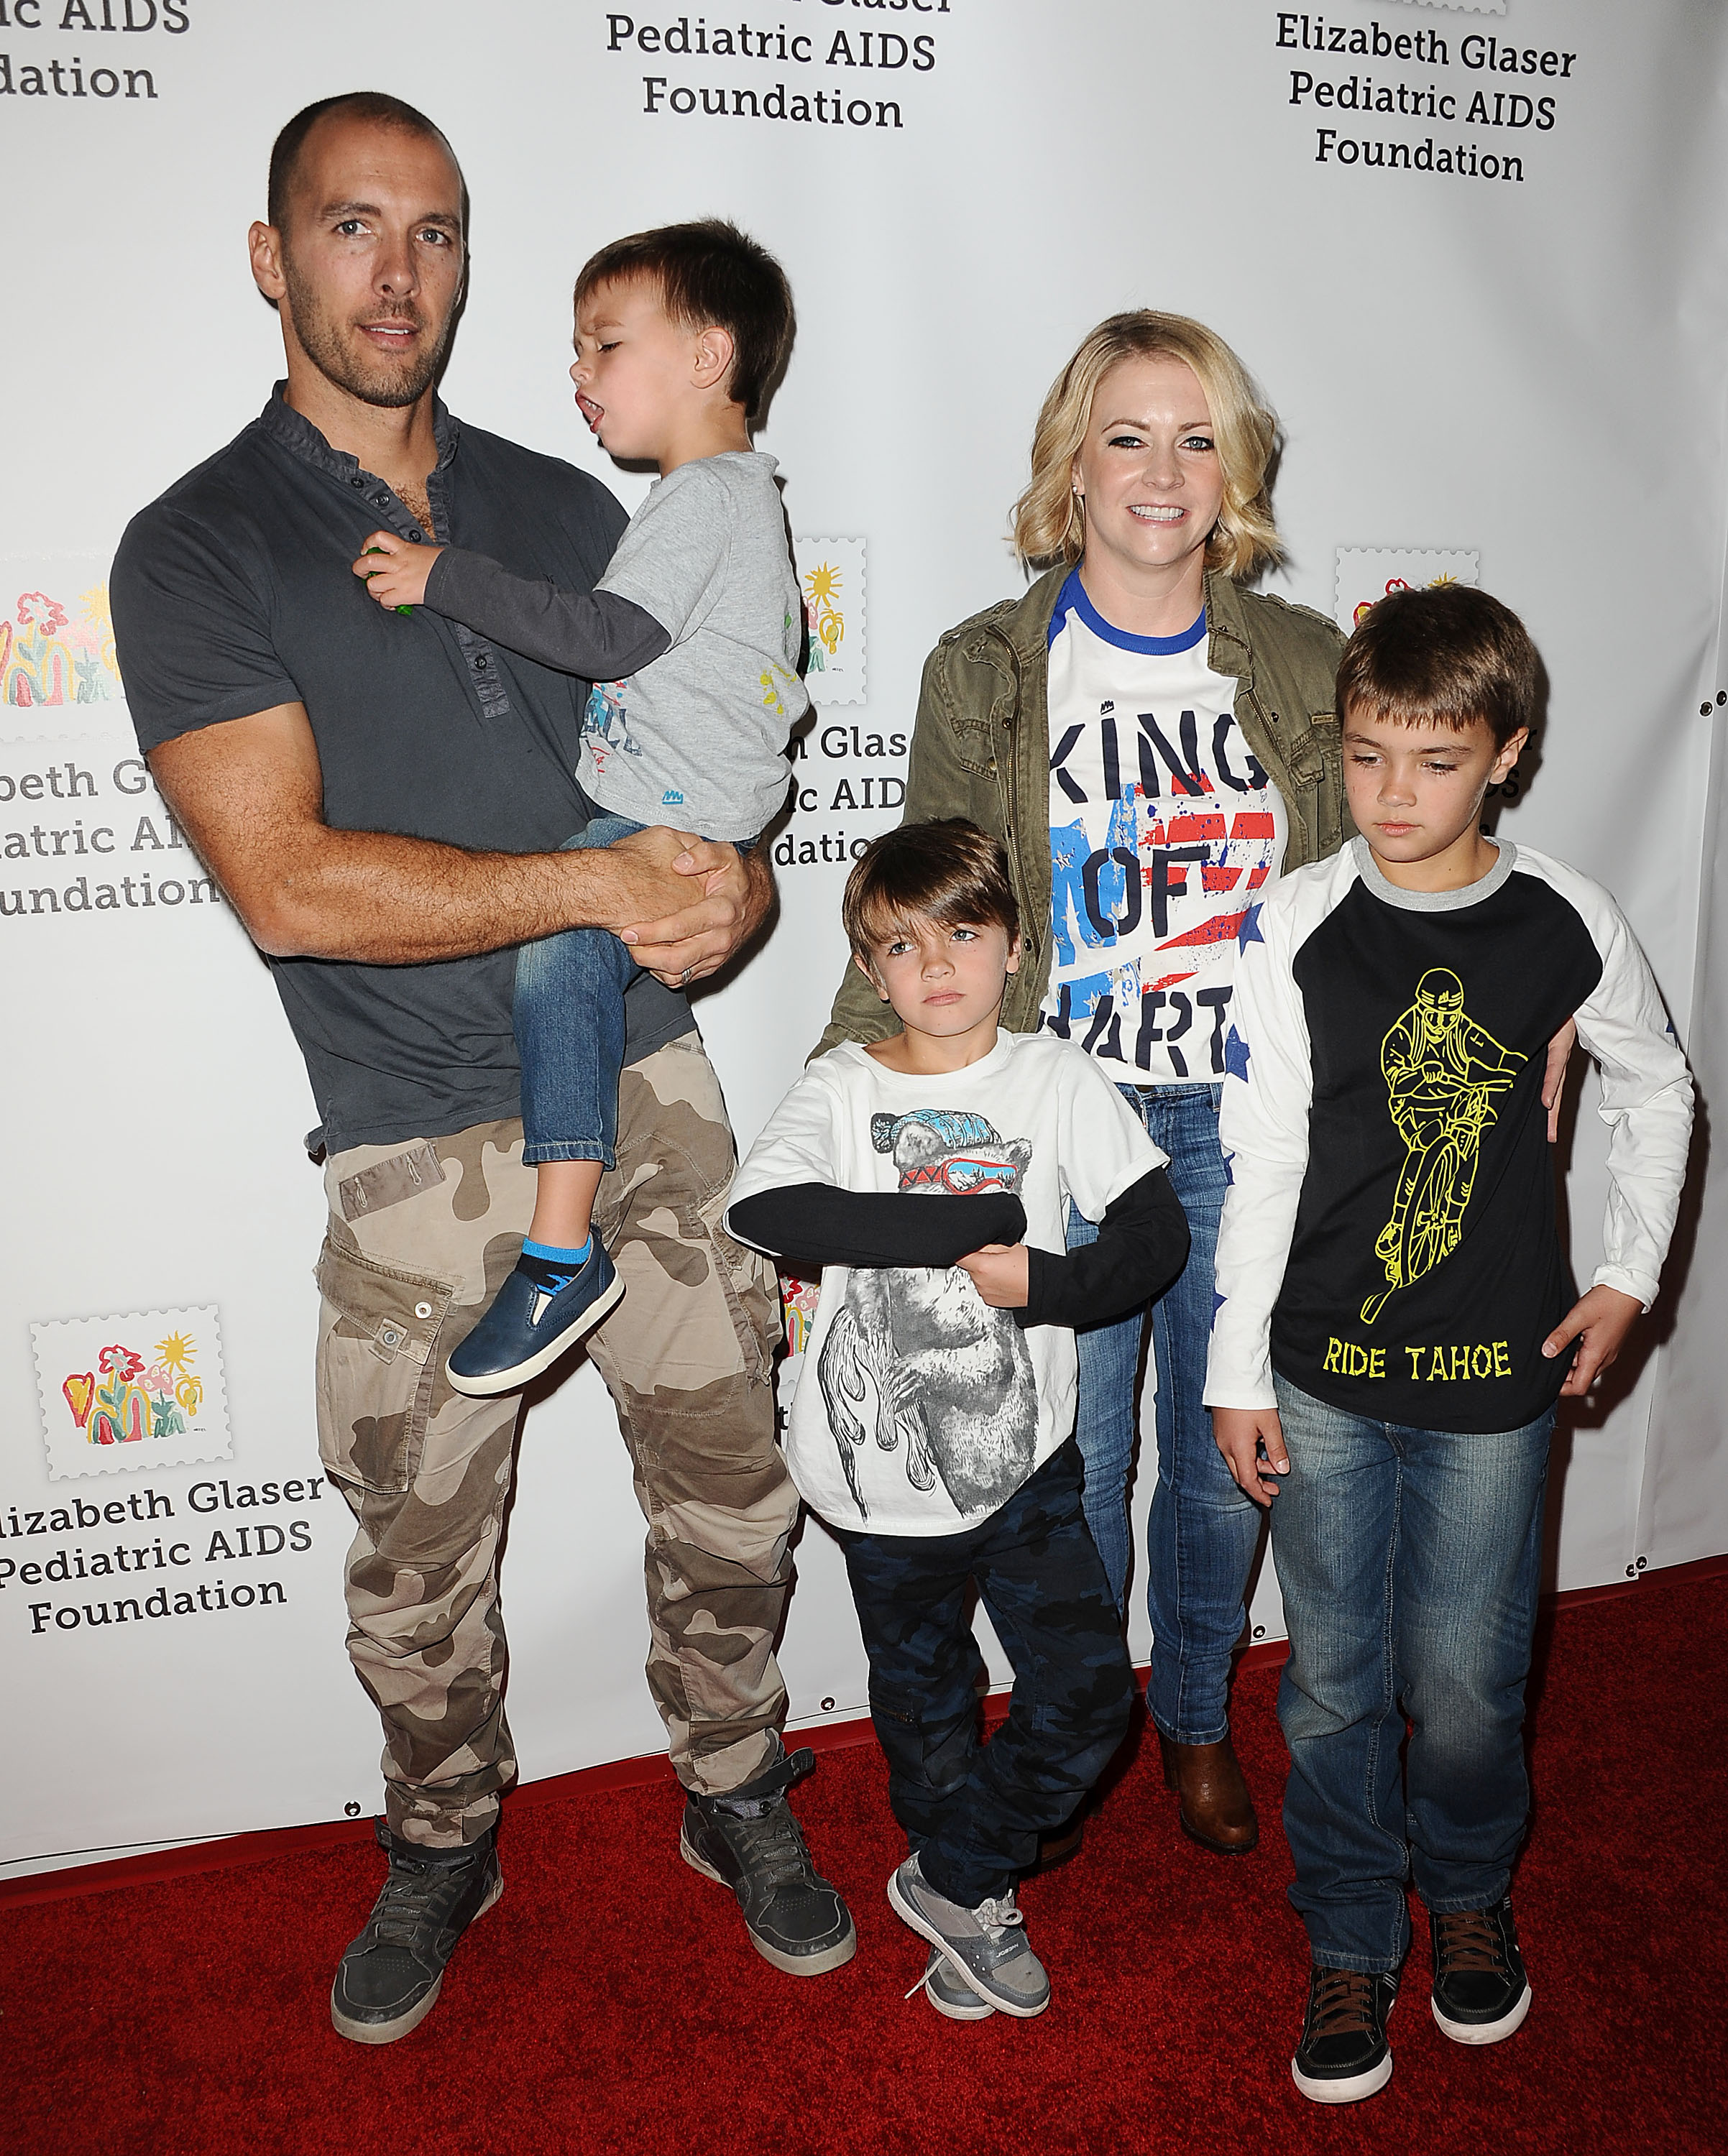 Mark Wilkerson and Melissa Joan Hart with their children Braydon, Mason, and Tucker attend the Elizabeth Glaser Pediatric AIDS Foundation's 26th A Time For Heroes family festival on October 25, 2015 in Culver City, California. | Source: Getty Images